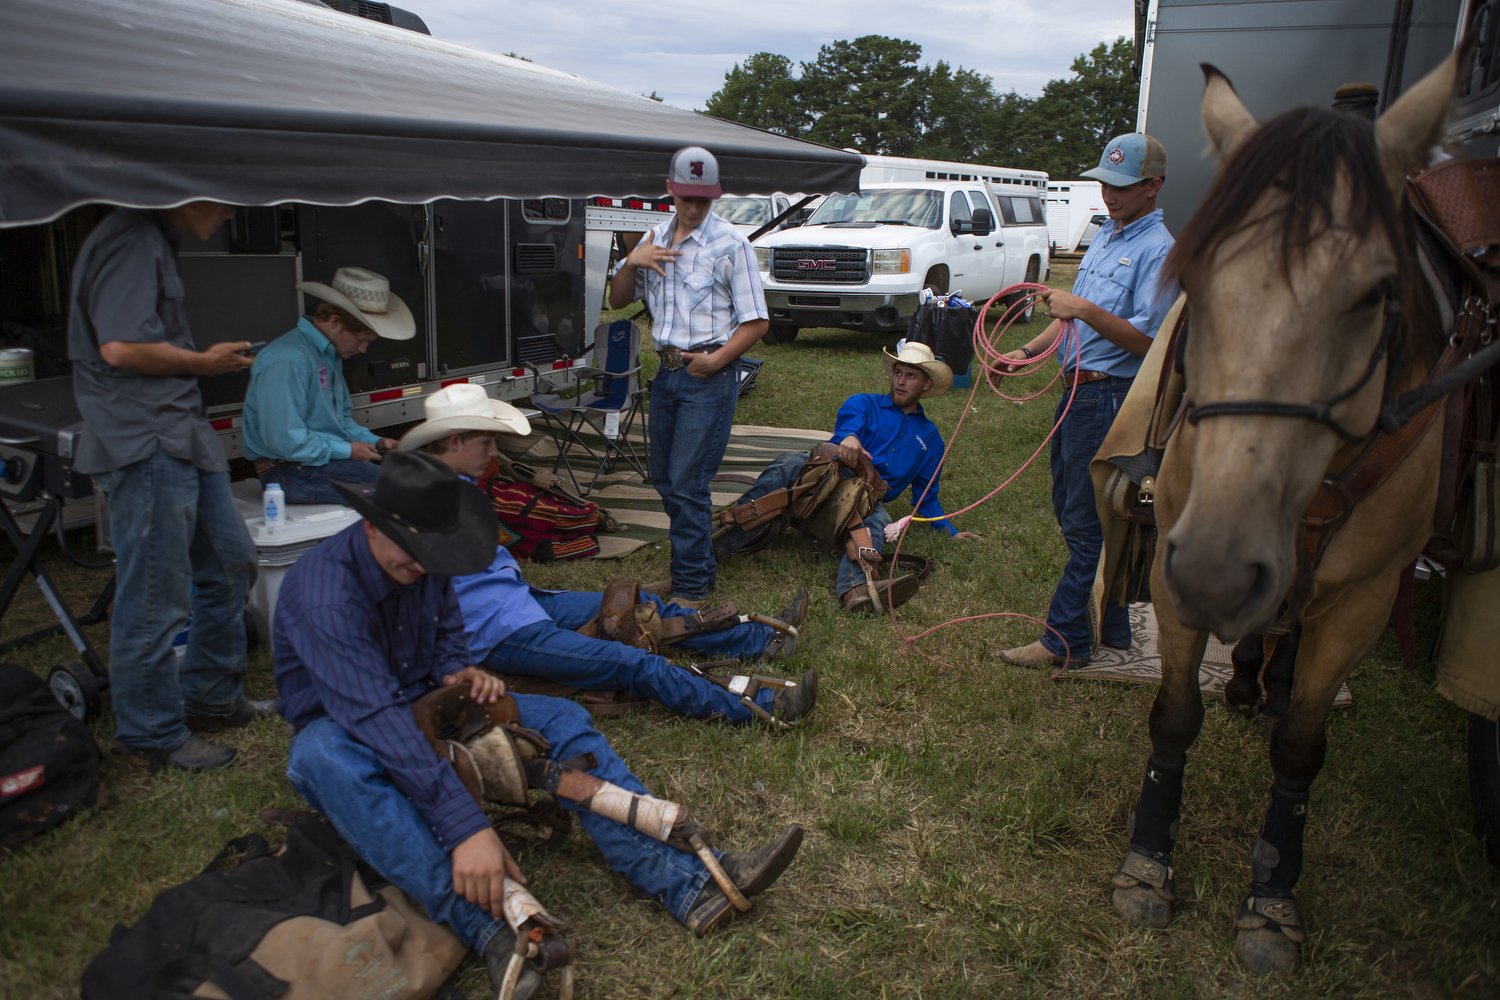  Bronc riders practice before the Mule Days rodeo in Benson, North Carolina on September 24, 2022. Mule Days, which has been held for 73 years, features a festival, music, a parade, and rodeos. Riders maneuver their horses and mules throughout the to